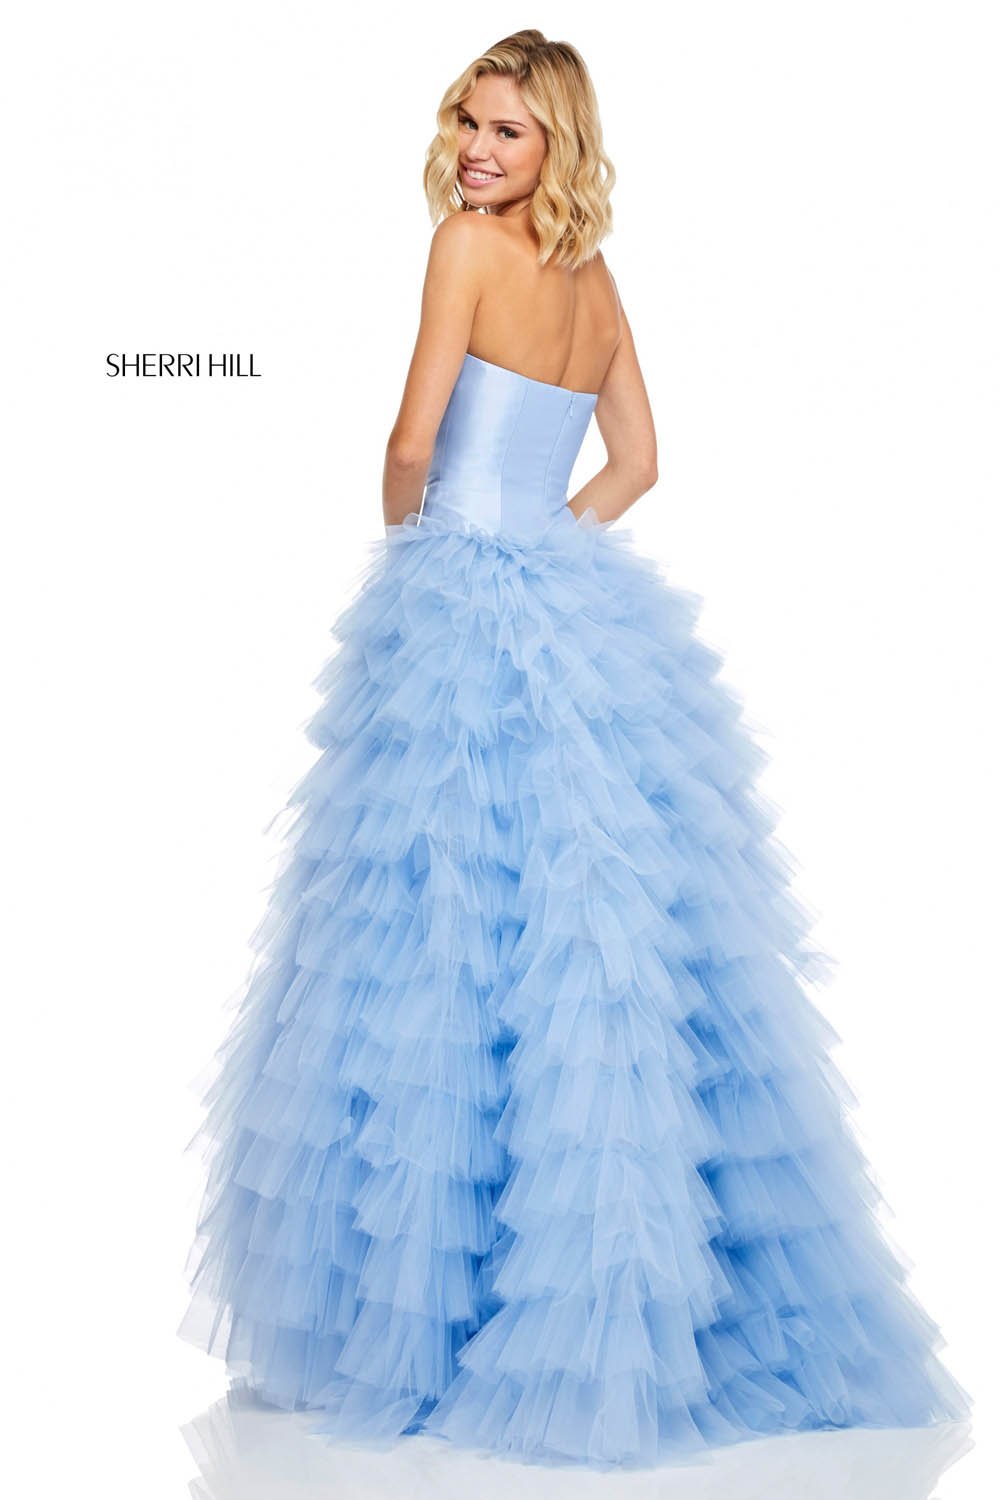 Sherri Hill 52690 dress images in these colors: Light Blue, Yellow, Black, Blush.